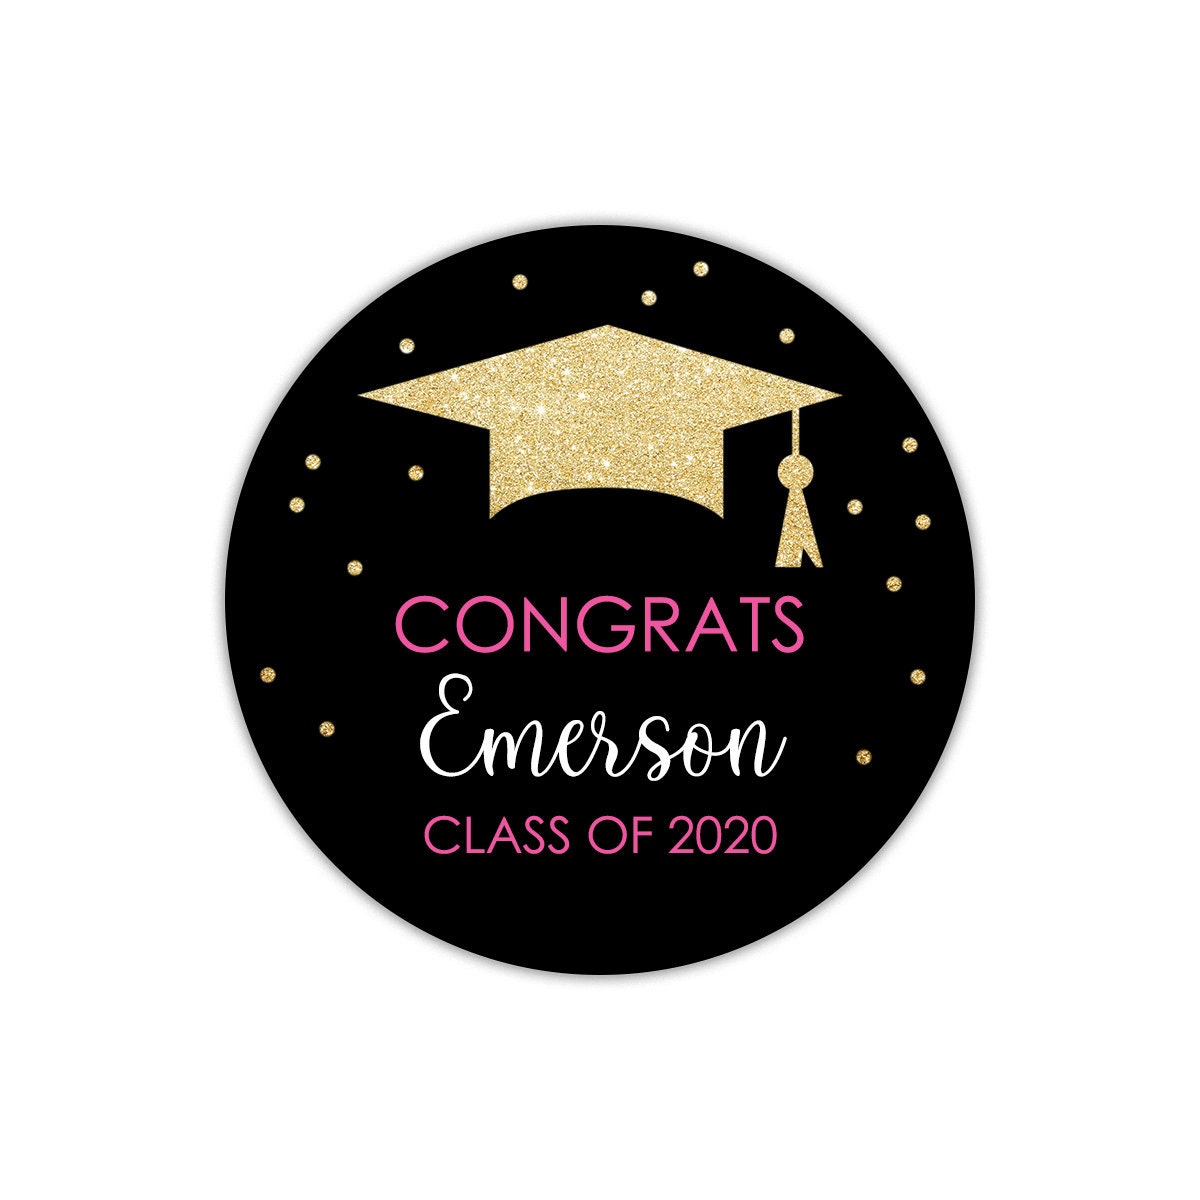 K59, Class of 2023 Envelope Seal Stickers, Graduation Stickers for